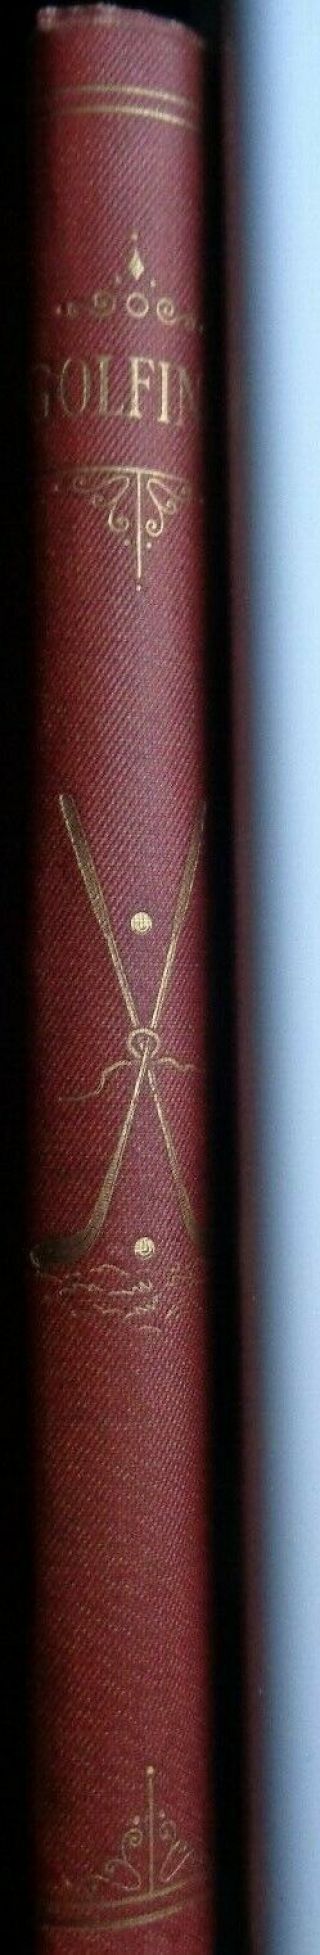 GOLFING - A Handbook To The Royal & Ancient Game - Chambers 1887 - VGC to Fine 2